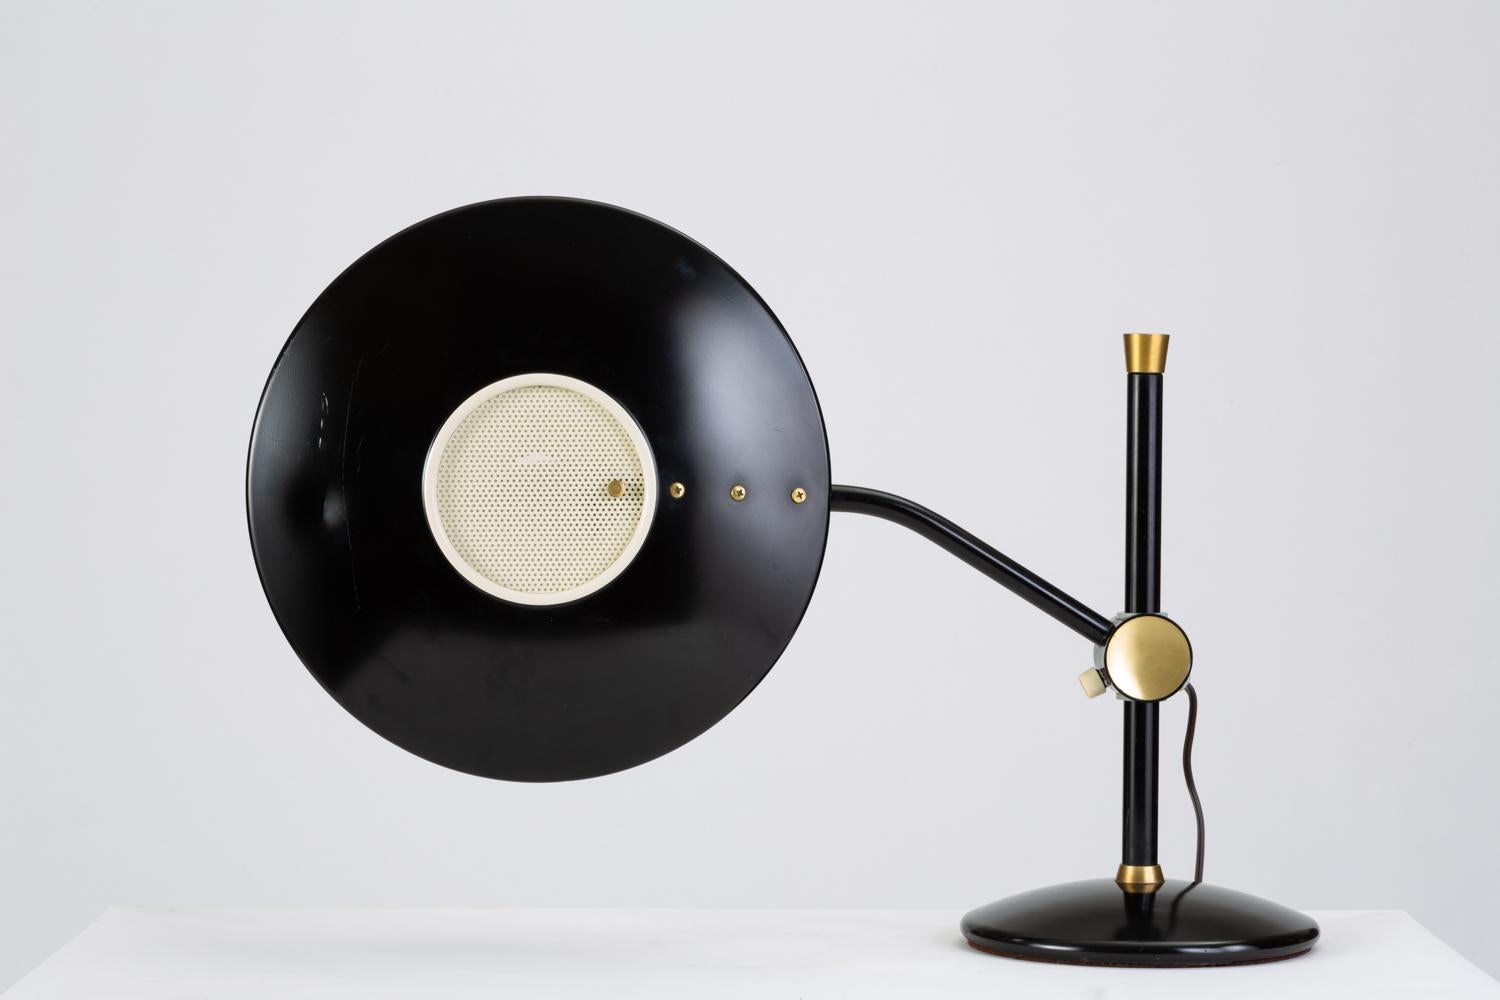 Black-Enameled Desk Lamp with Brass Accents by Dazor 2